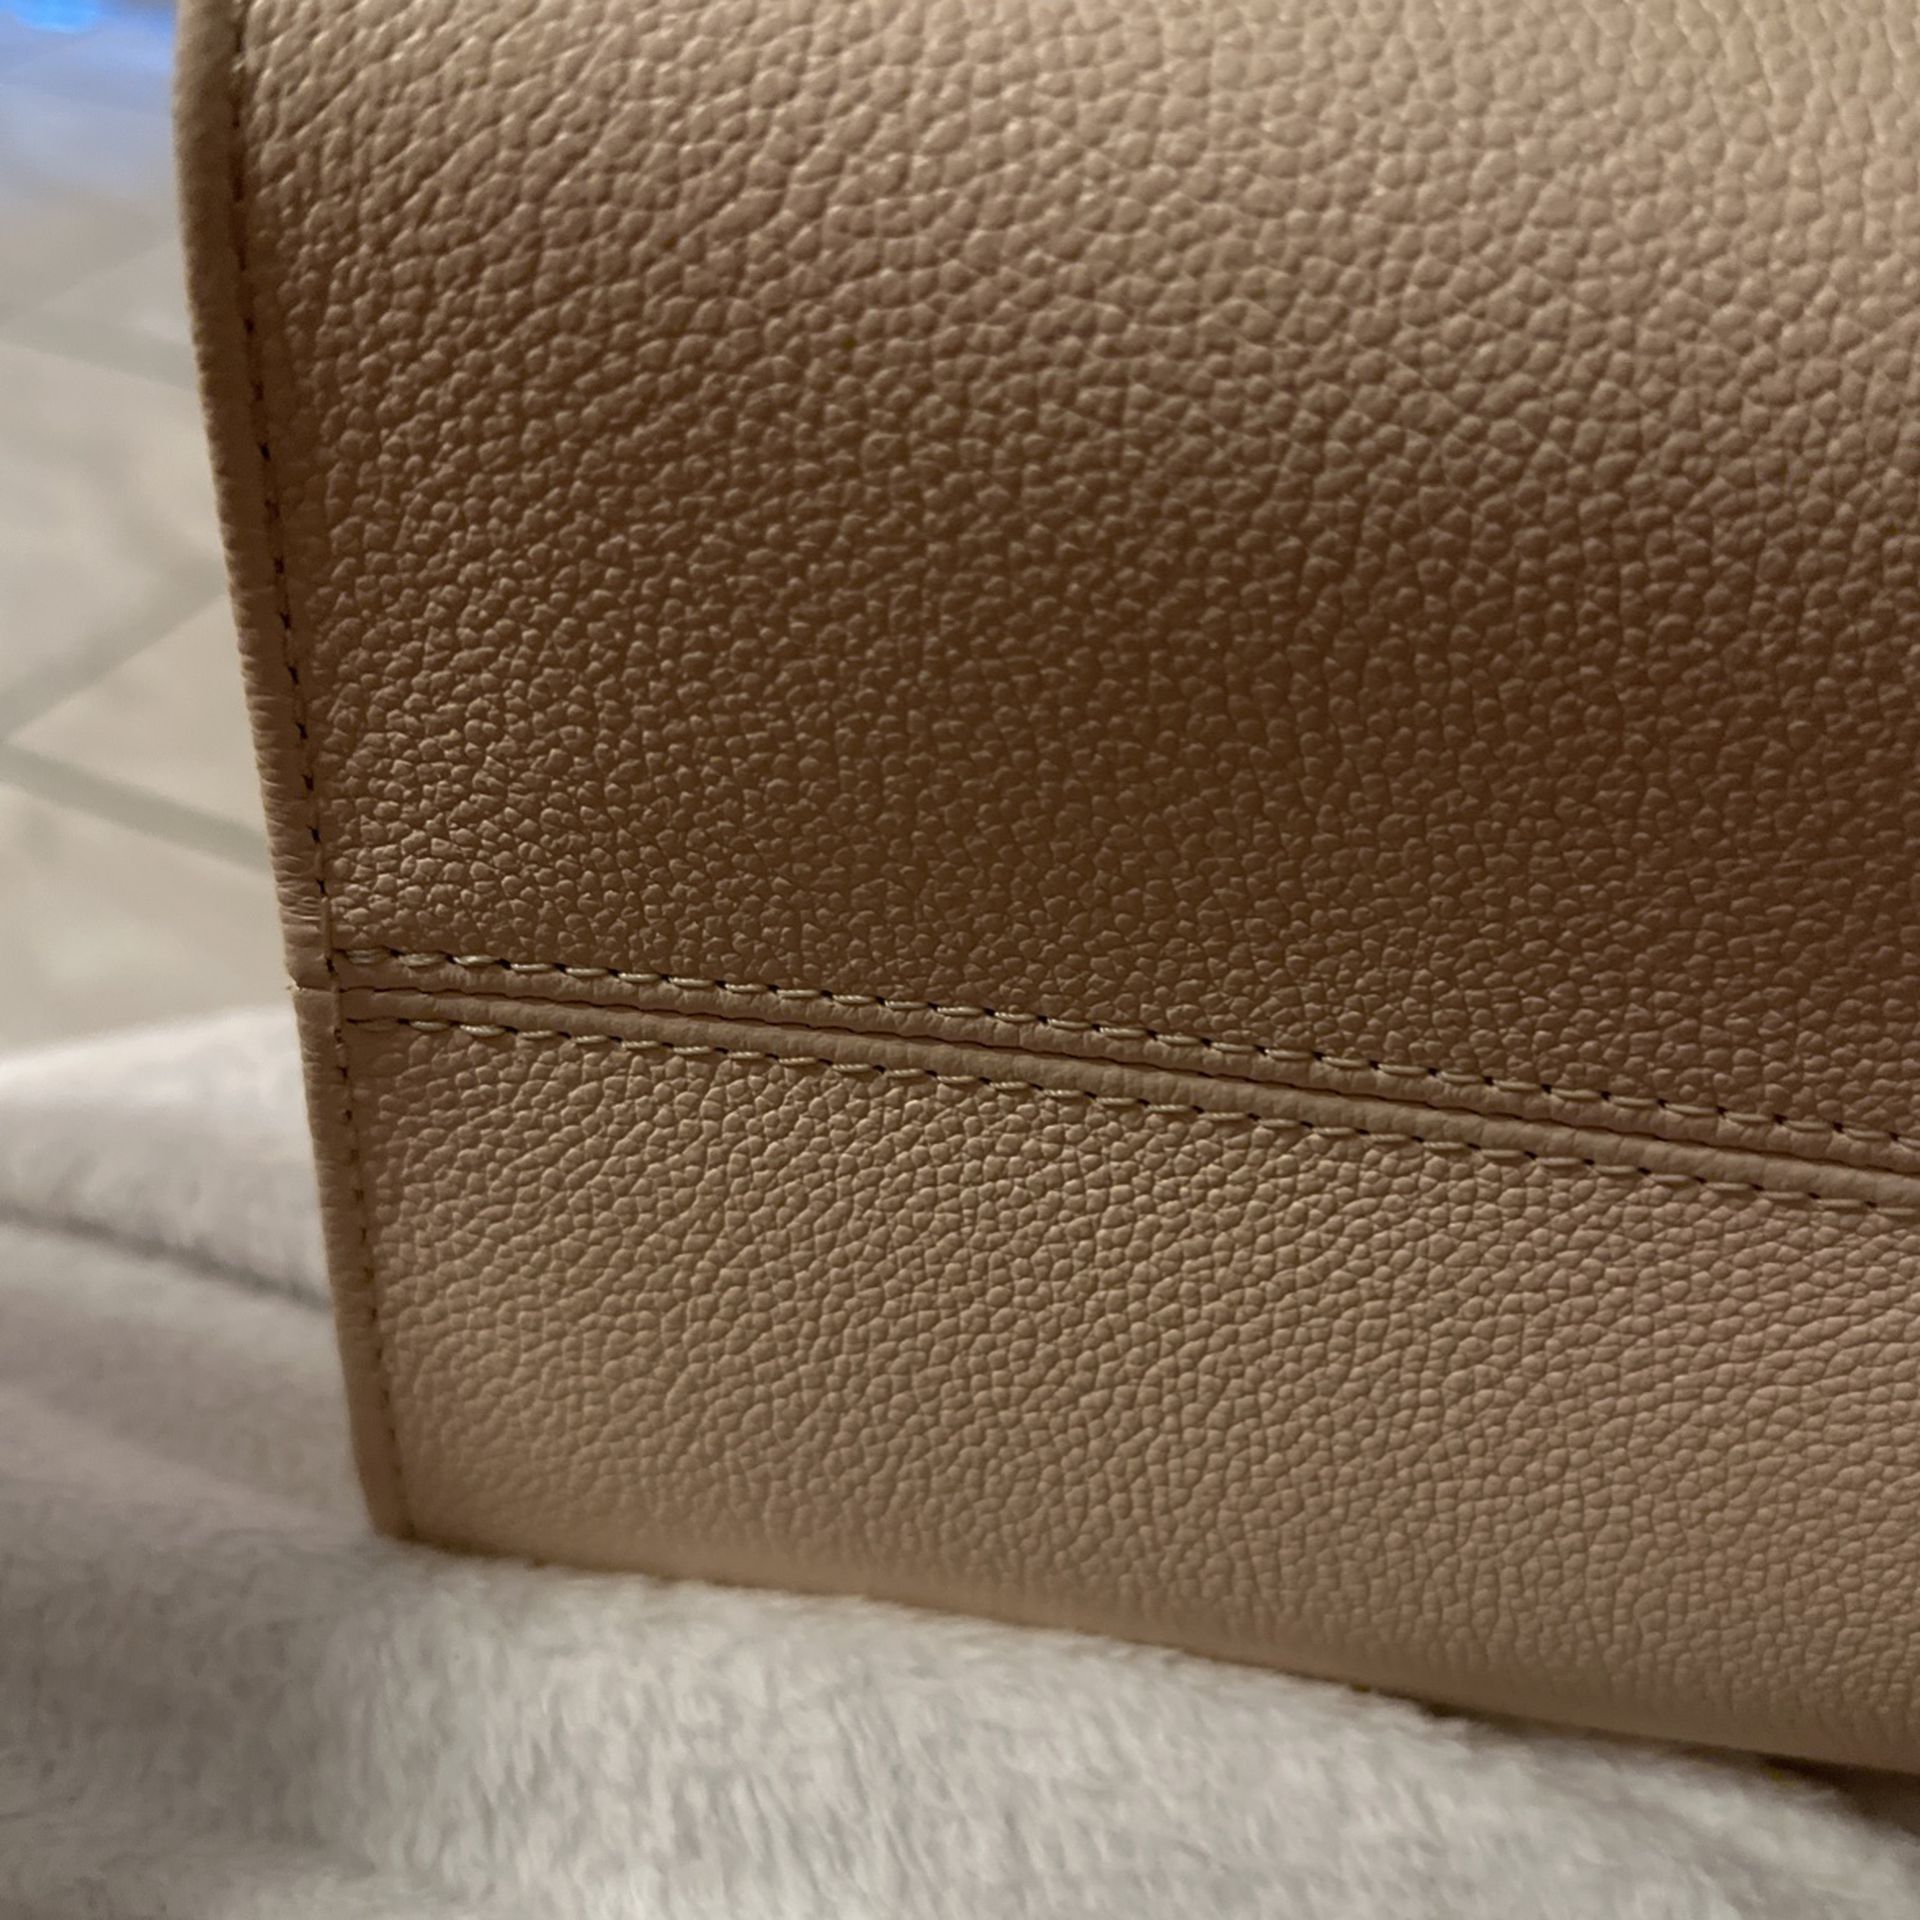 Louis Vuitton Passport Holder - Date Code: MB2157 for Sale in Tampa, FL -  OfferUp